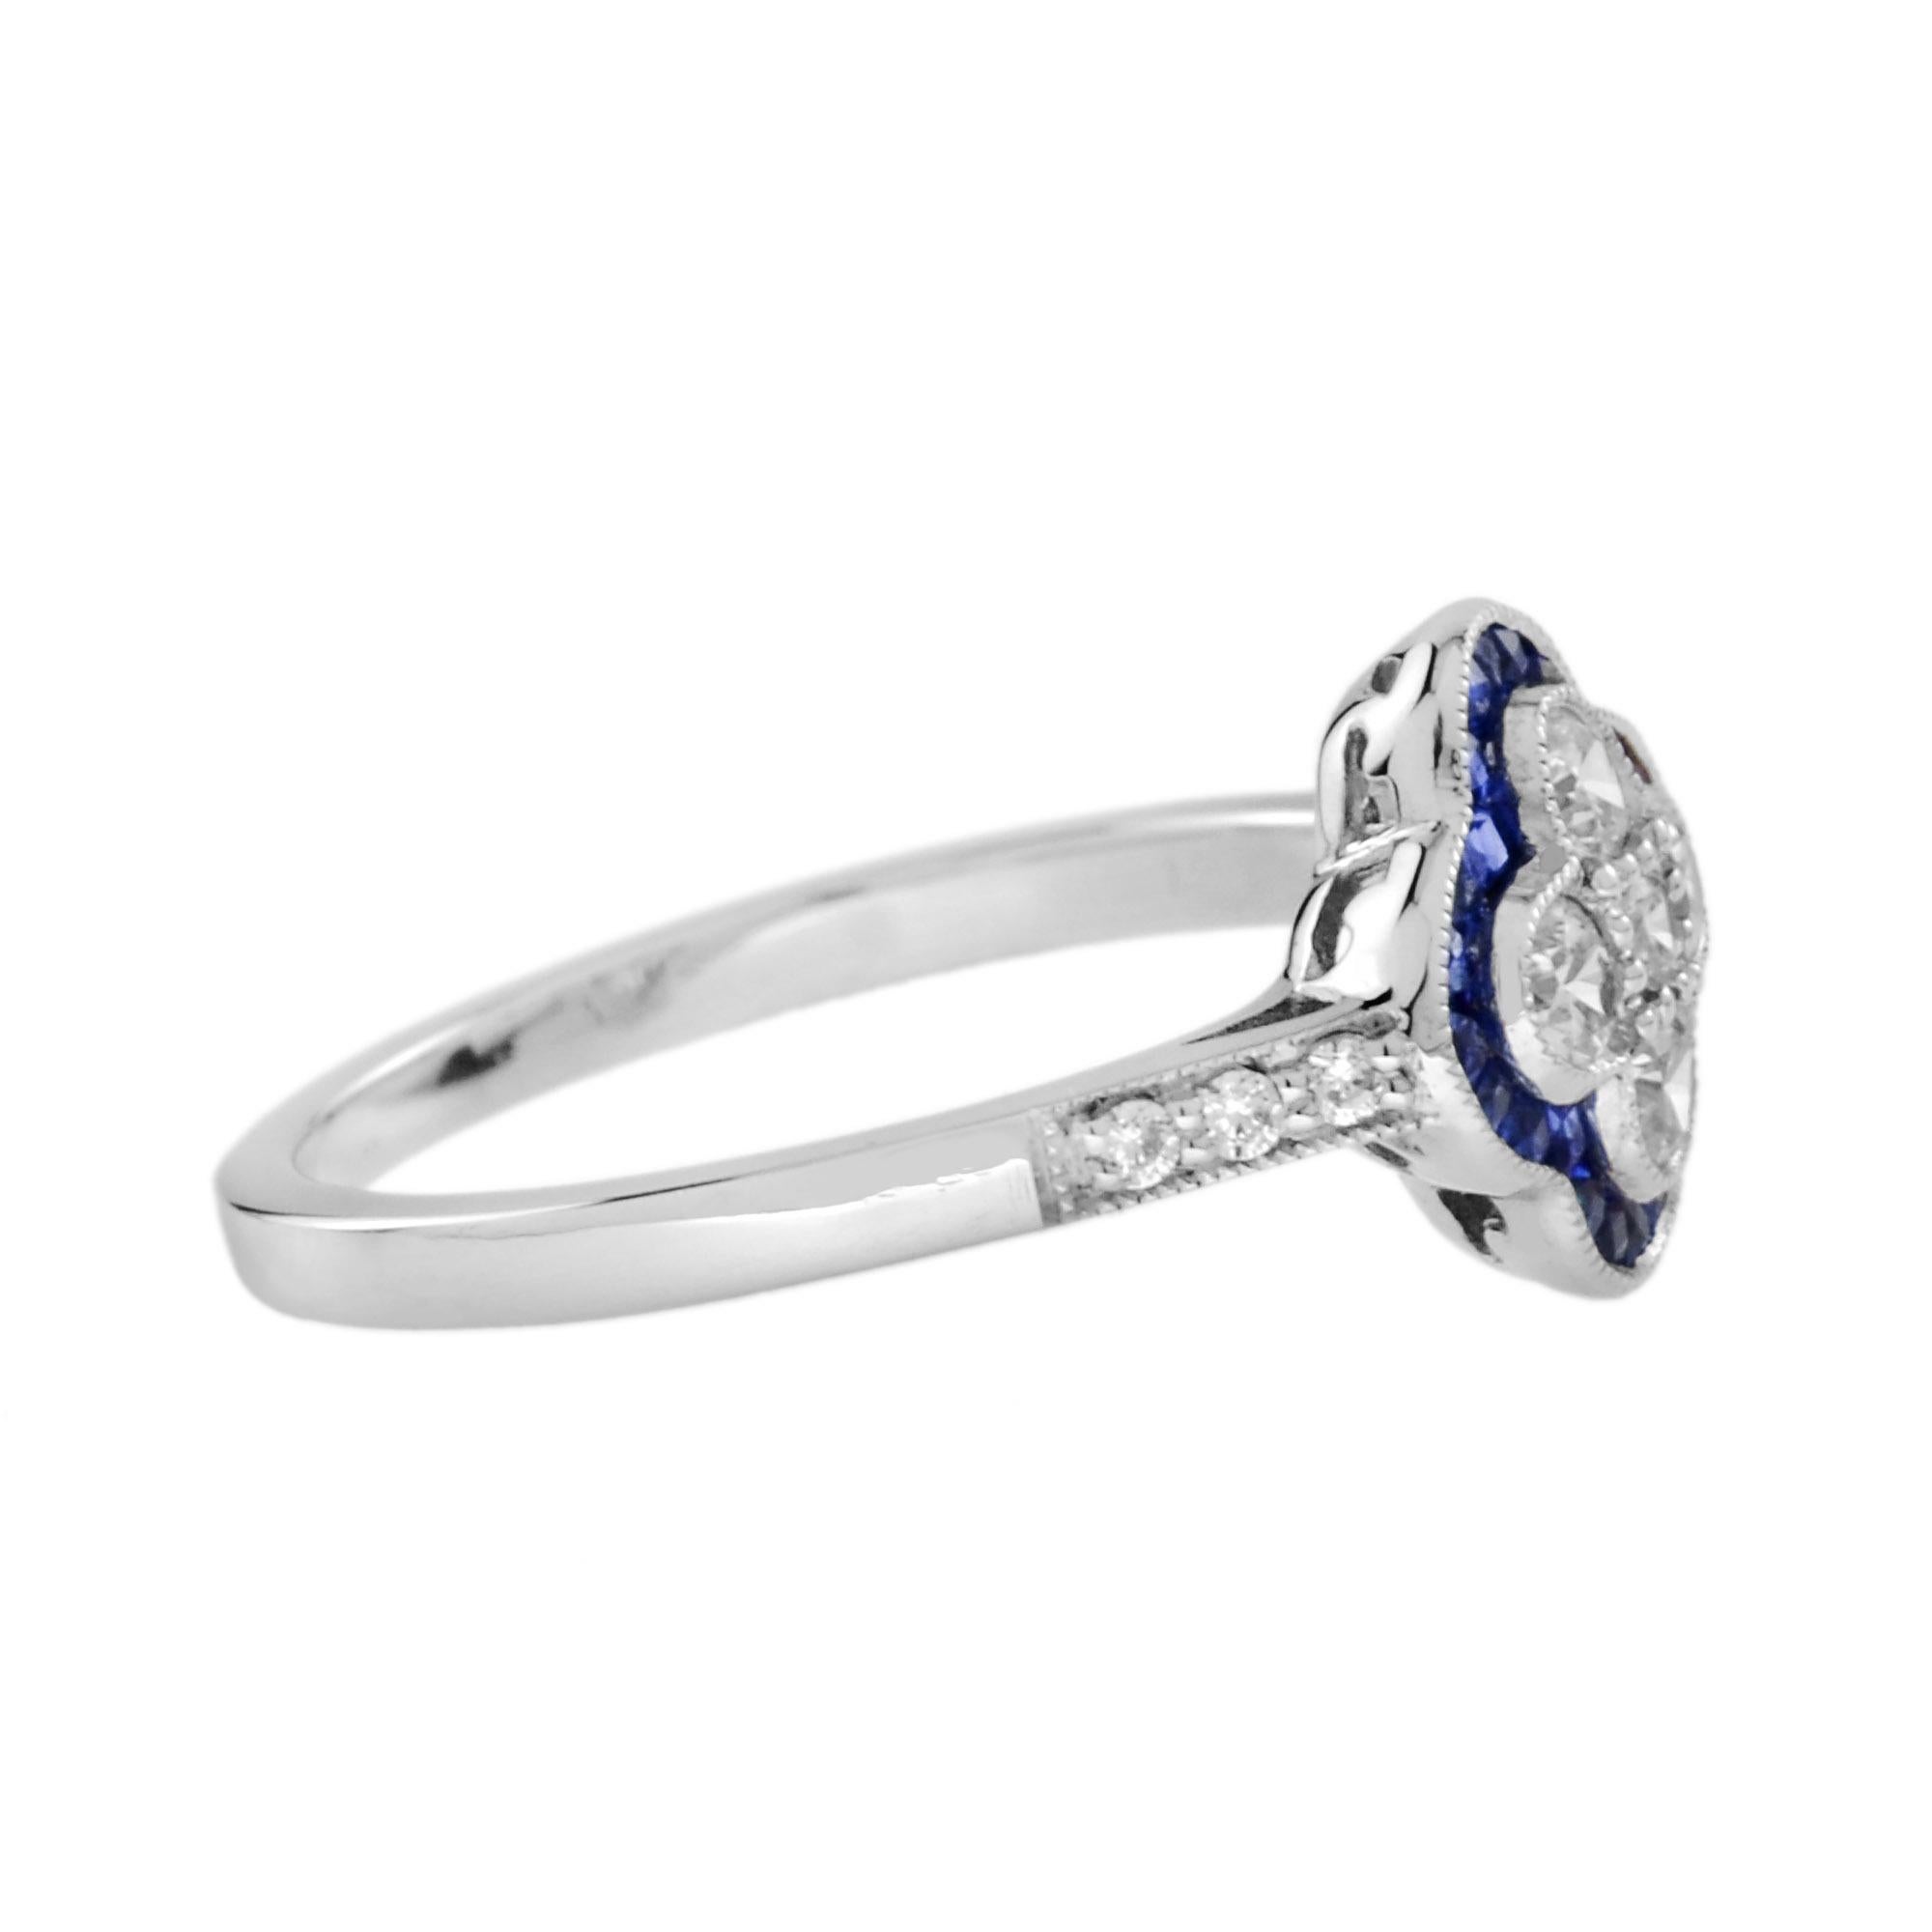 For Sale:  Diamond and Blue Sapphire Art Deco Style Floral Ring in 18K White Gold 3